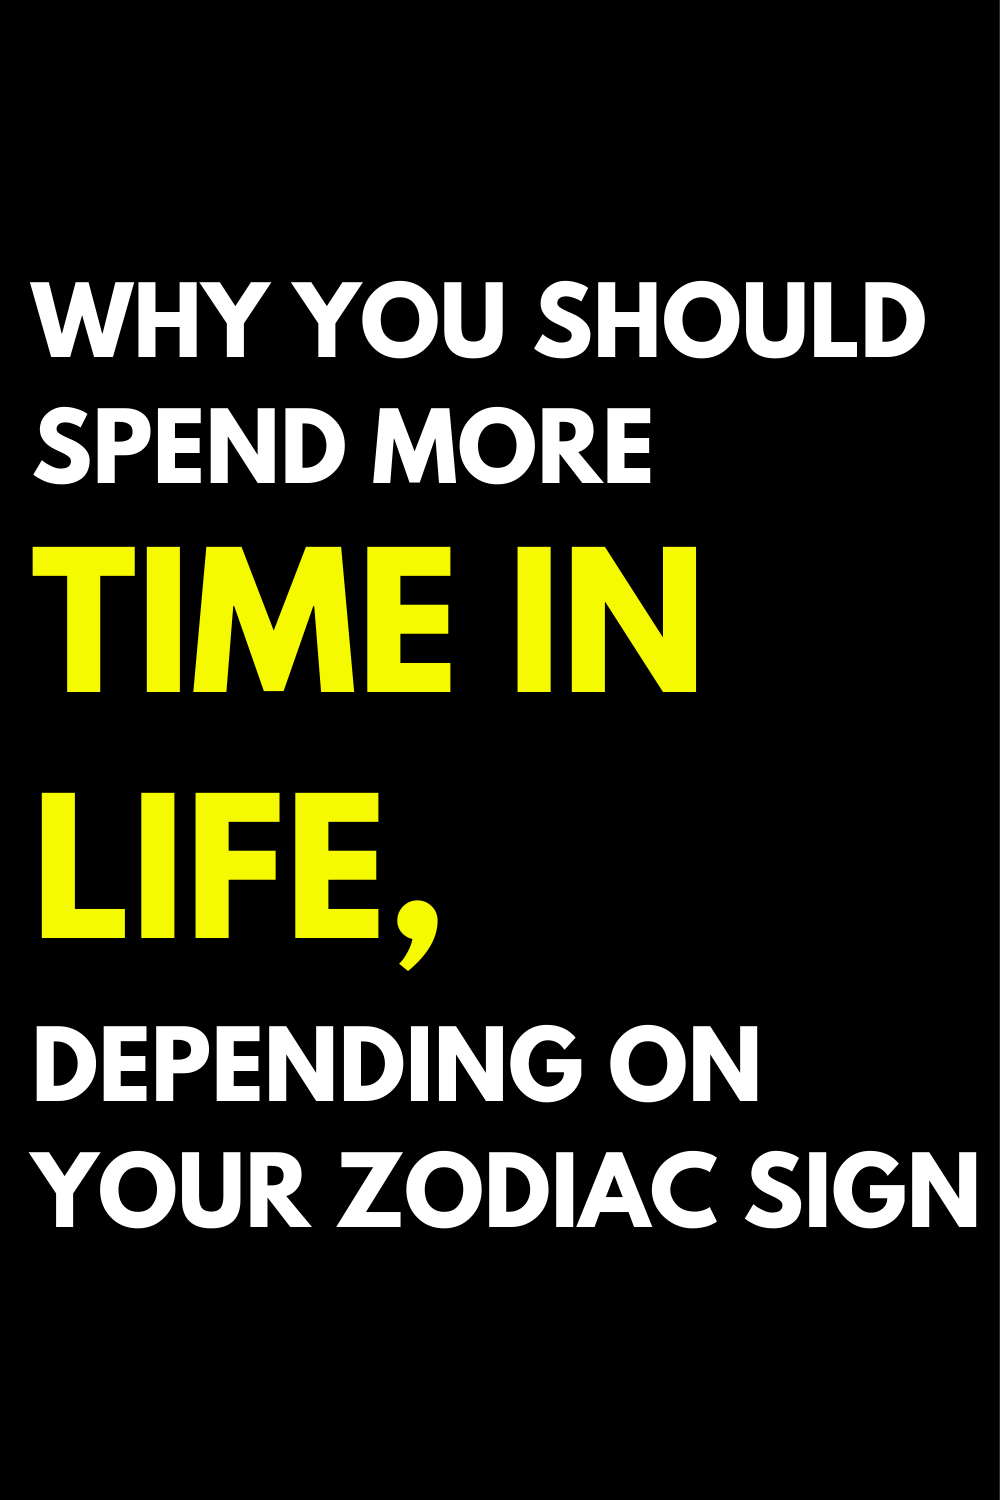 Why you should spend more time in life, depending on your zodiac sign